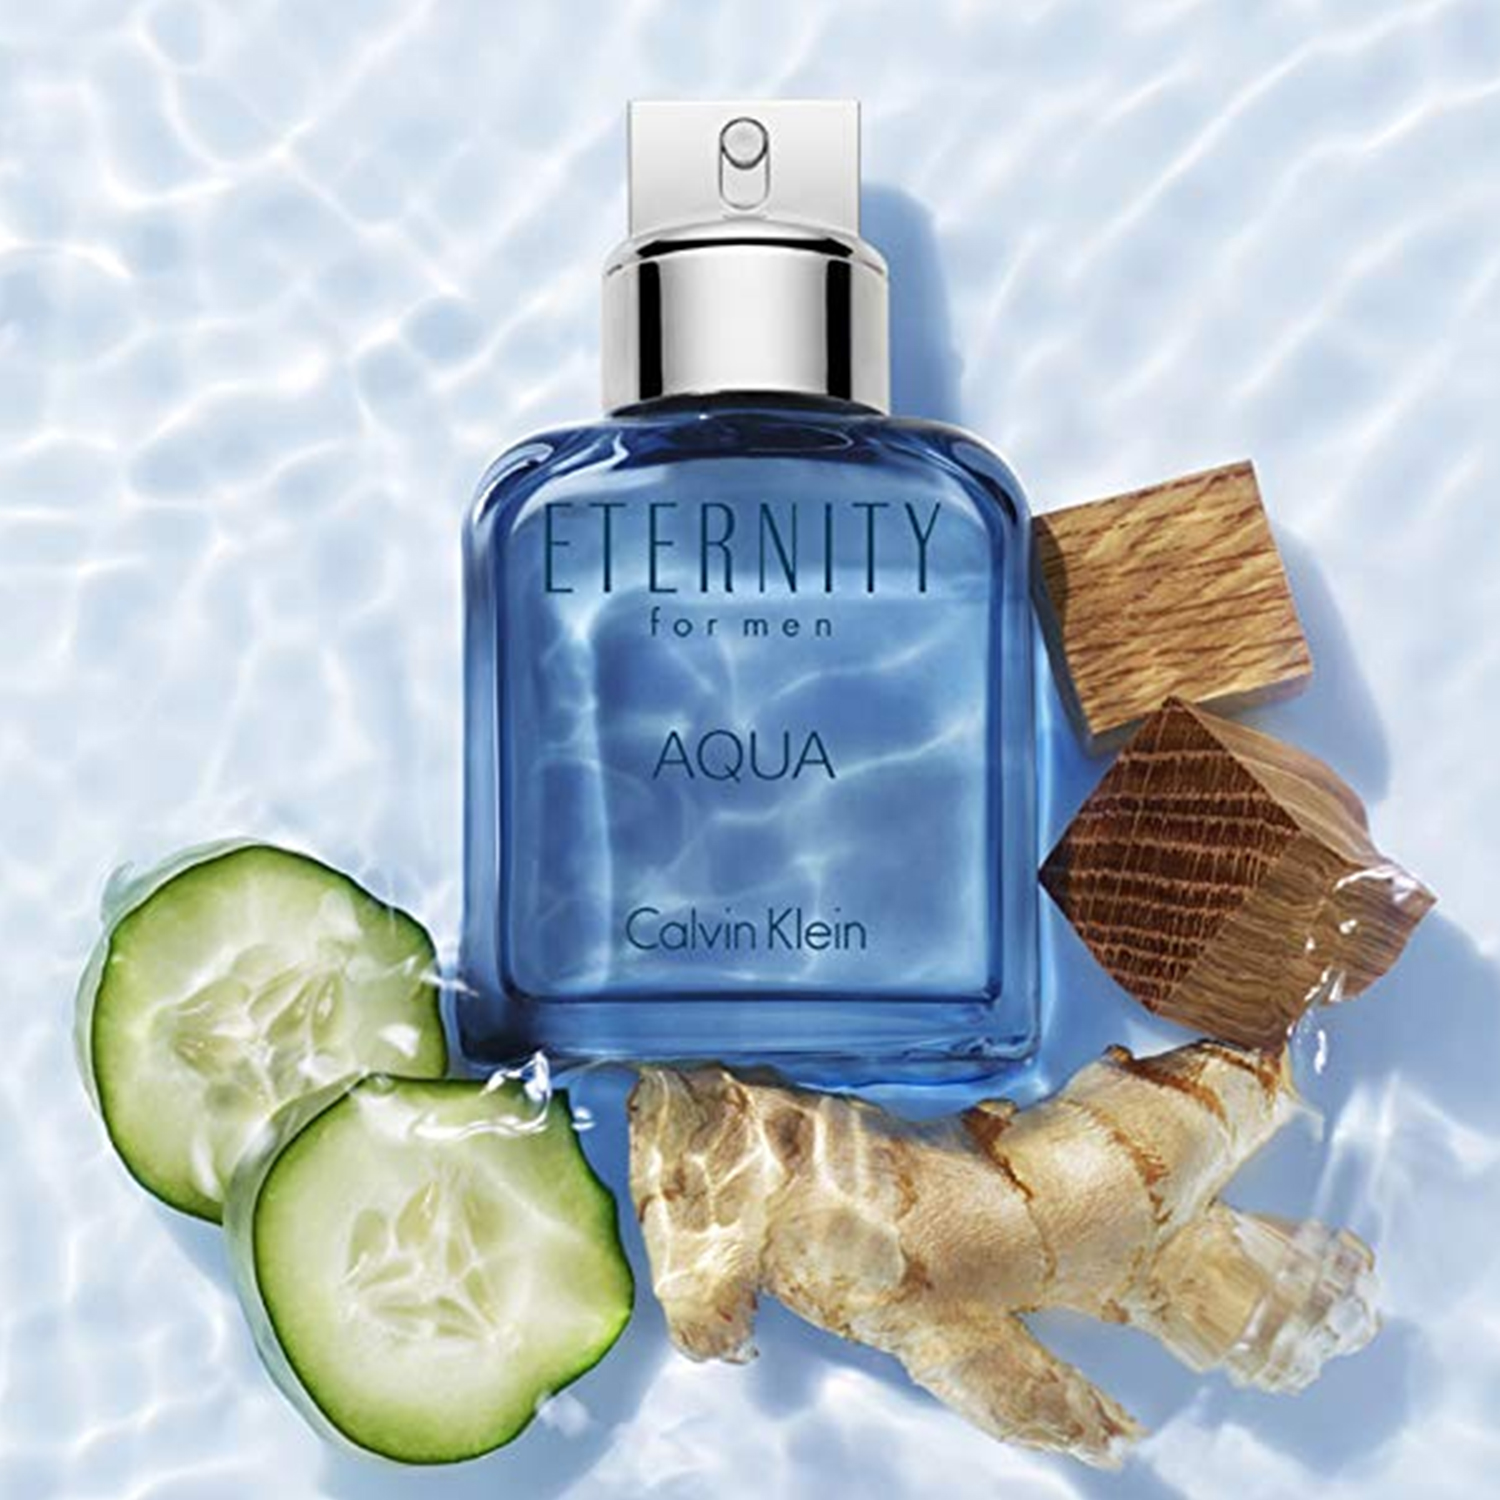 CK Calvin Klein Eternity Aqua For Men EDT  Top Notes : Chilled cucumber, citrus cocktail, lotus and green leaves  Middle Notes : Szechuan pepper, mirabelle, lavender and cedar  Bottom Notes : Sandalwood, guaiac wood, patchouli and musk